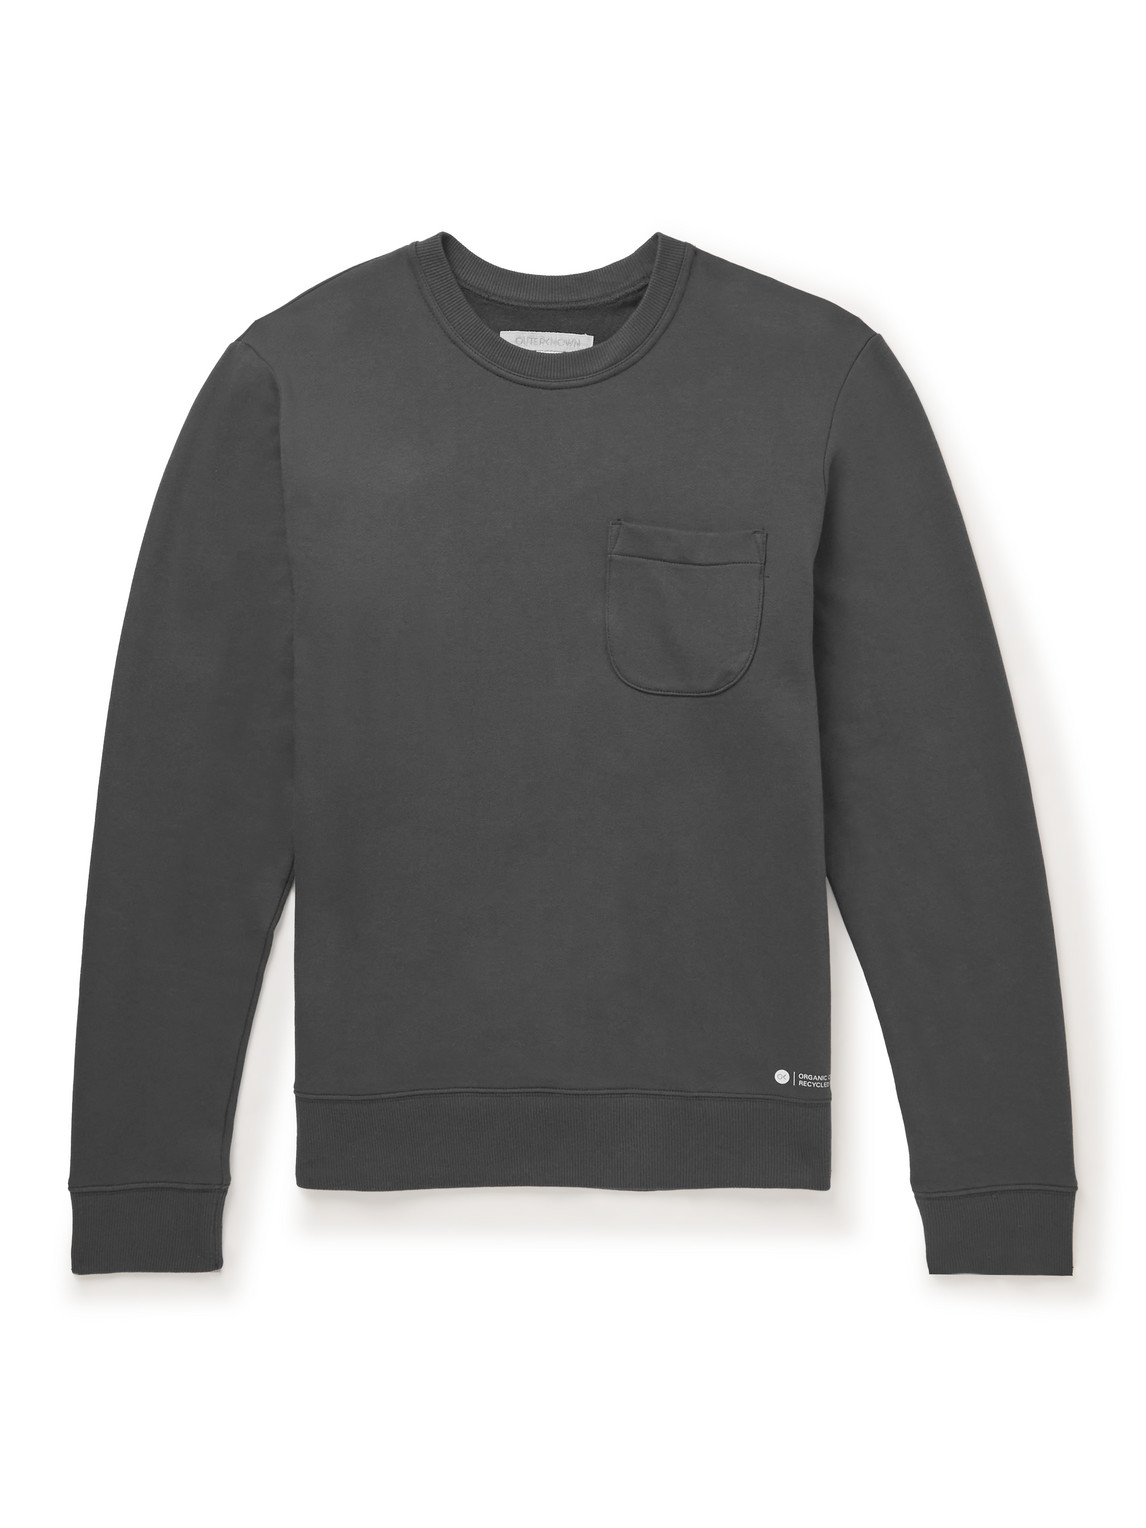 Outerknown All-day Organic Cotton-blend Jersey Sweatshirt In Black